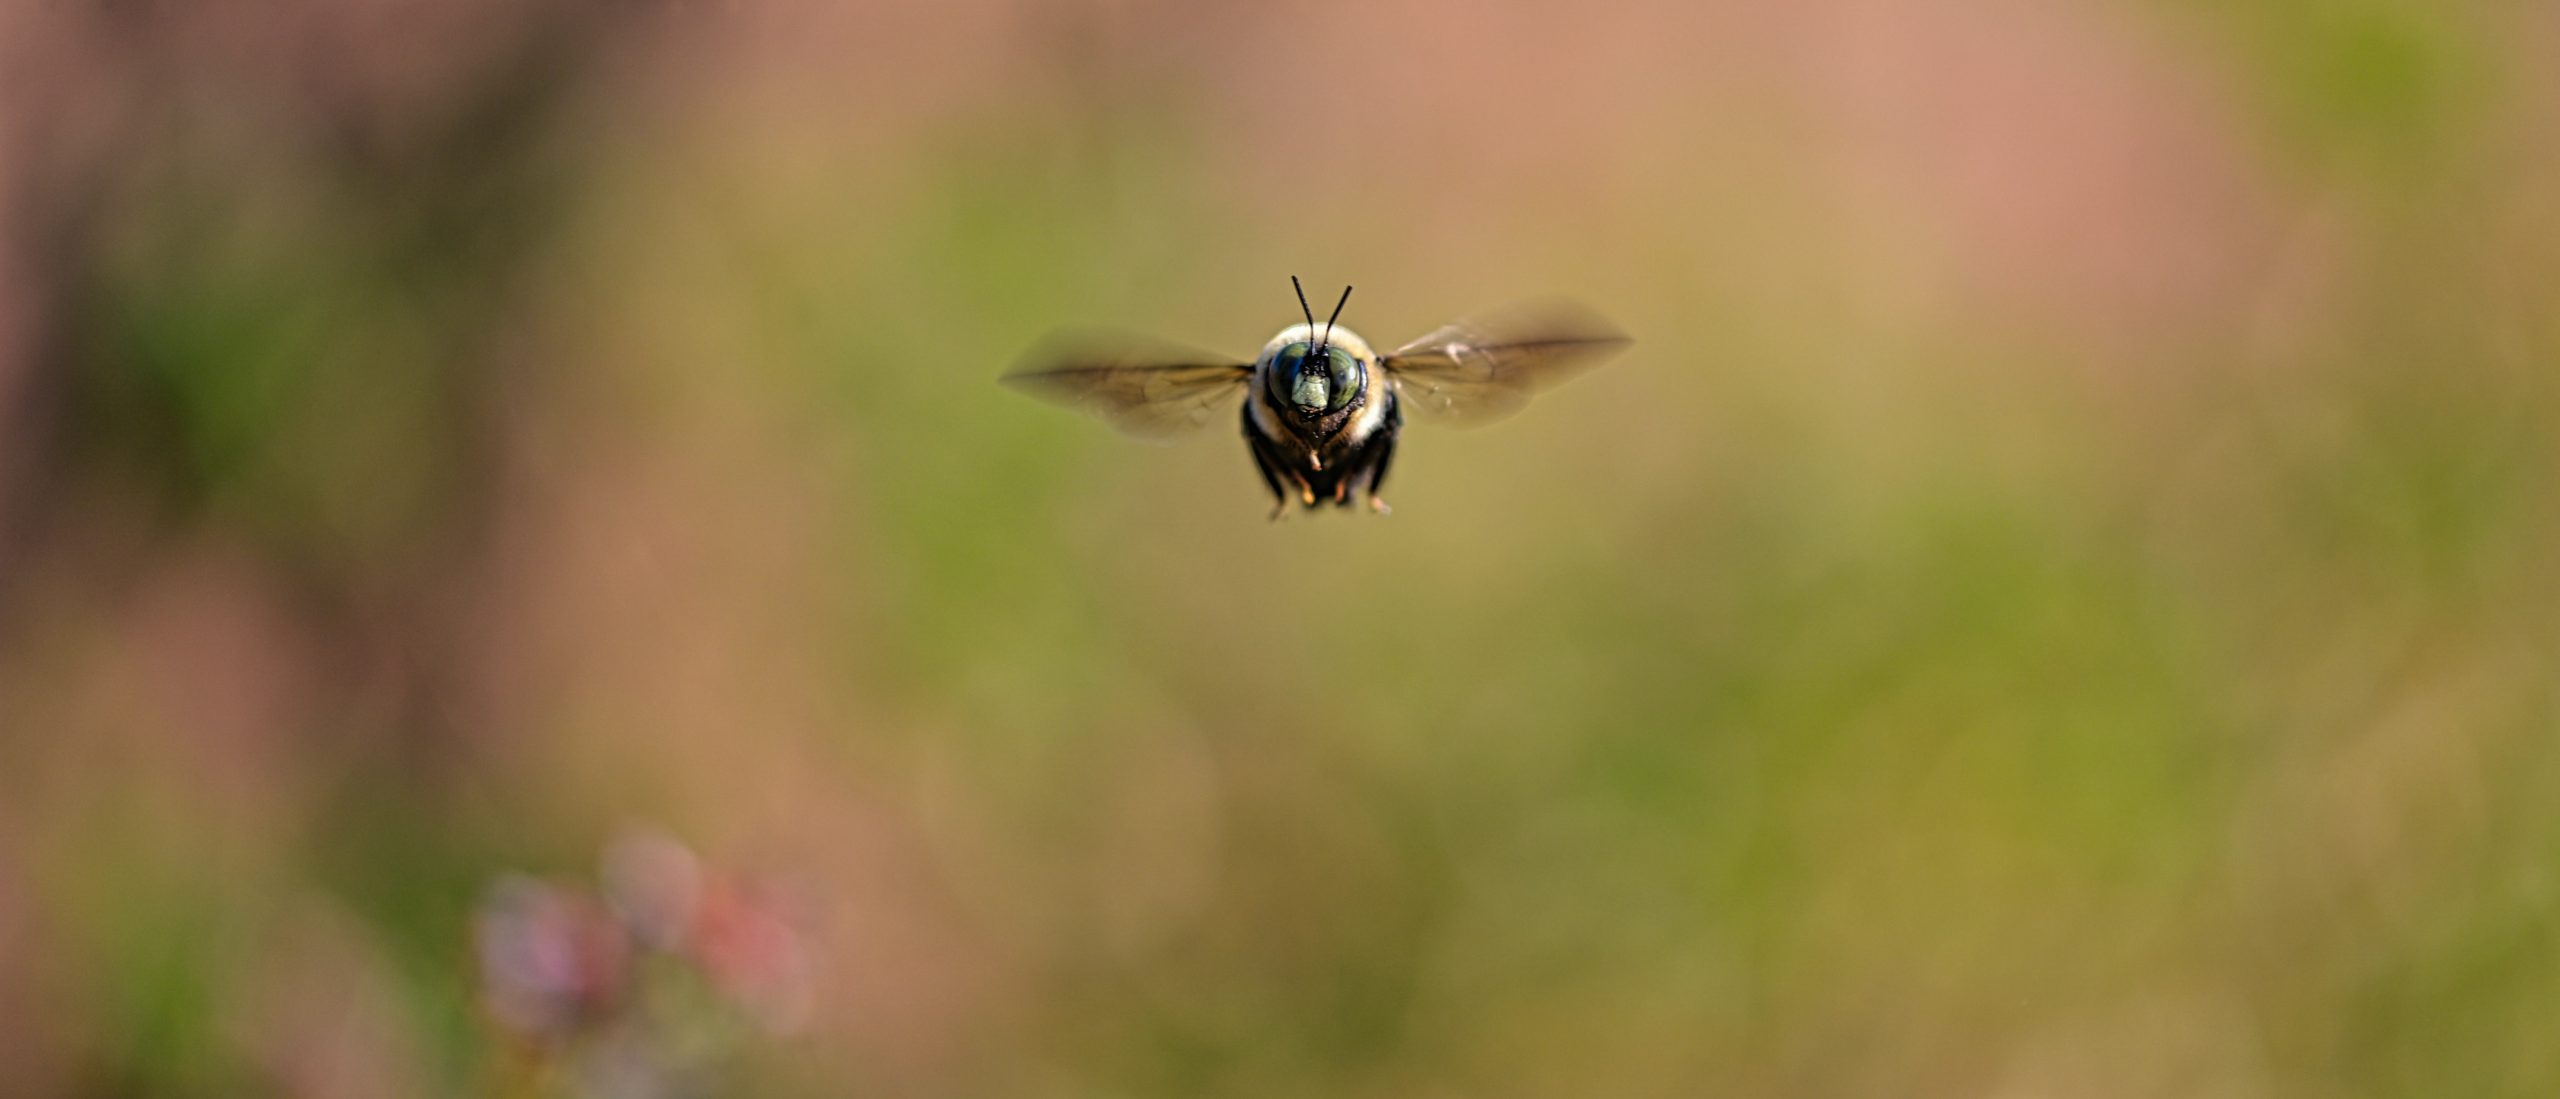 A bumblebee flies against a green and pink background